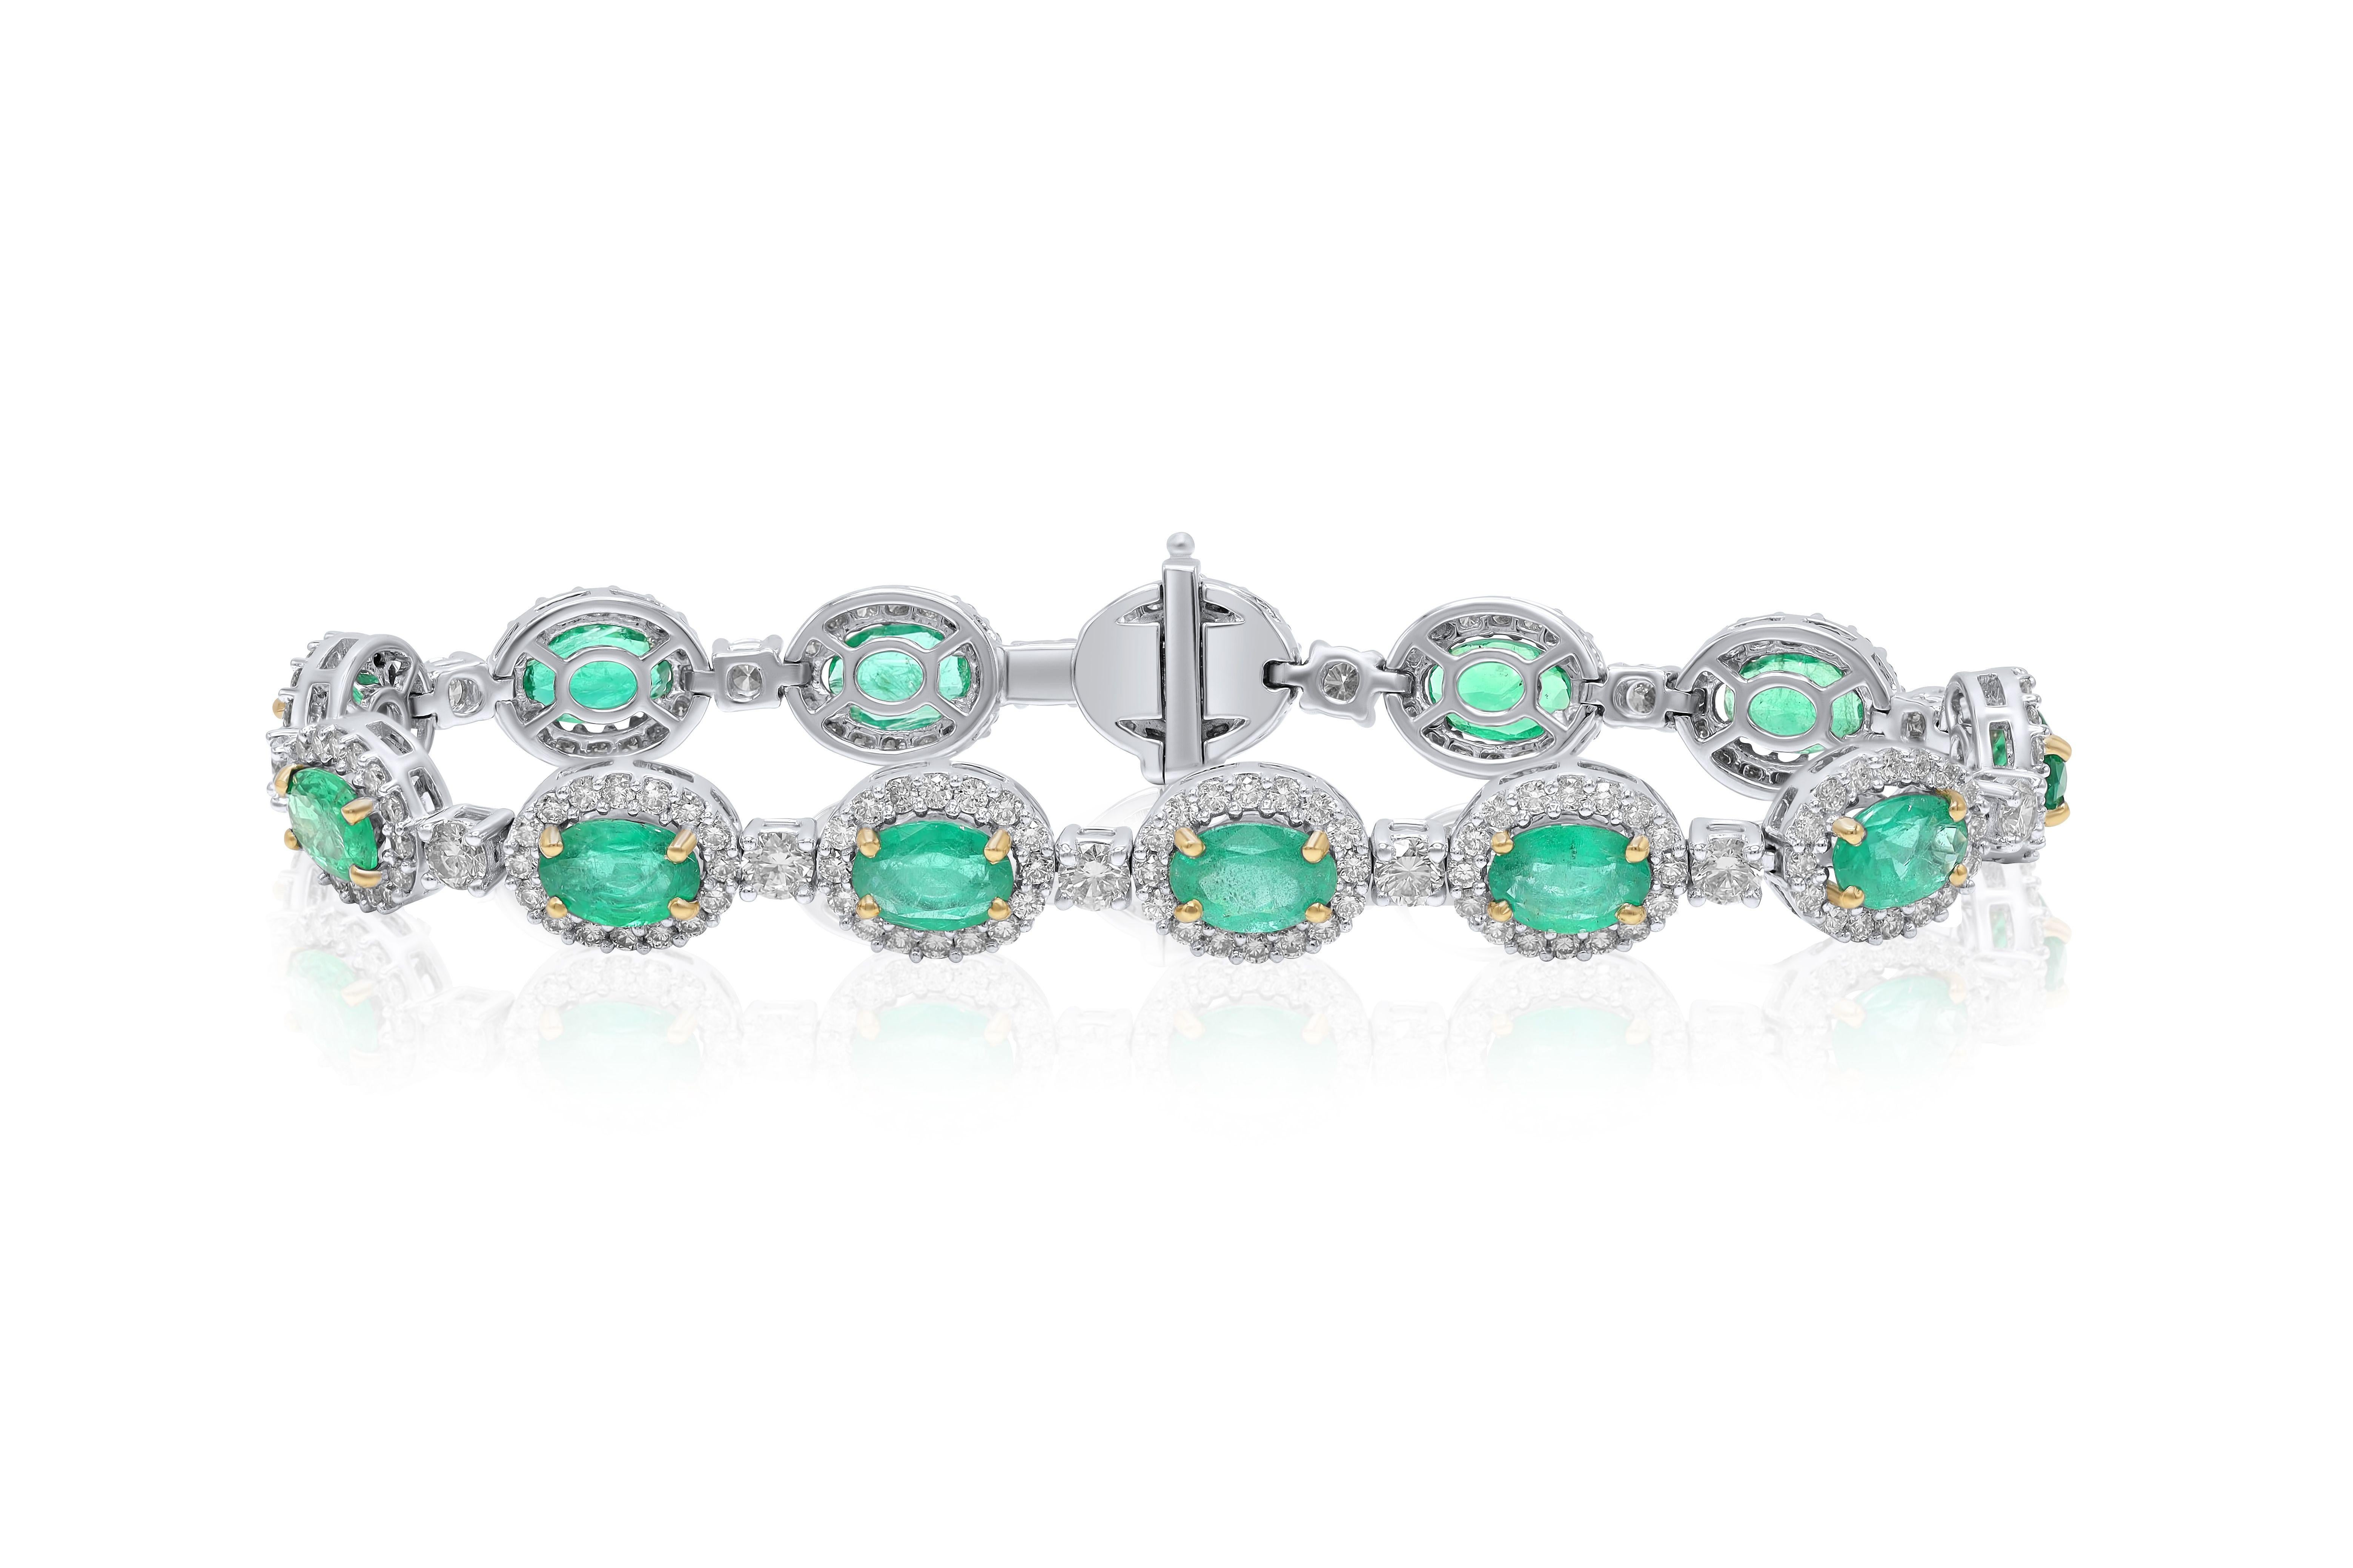 18 kt white gold diamond and emerald bracelet adorned with 8.01 cts tw of oval cut emeralds surrounded and separated by 4.12 cts tw of diamonds